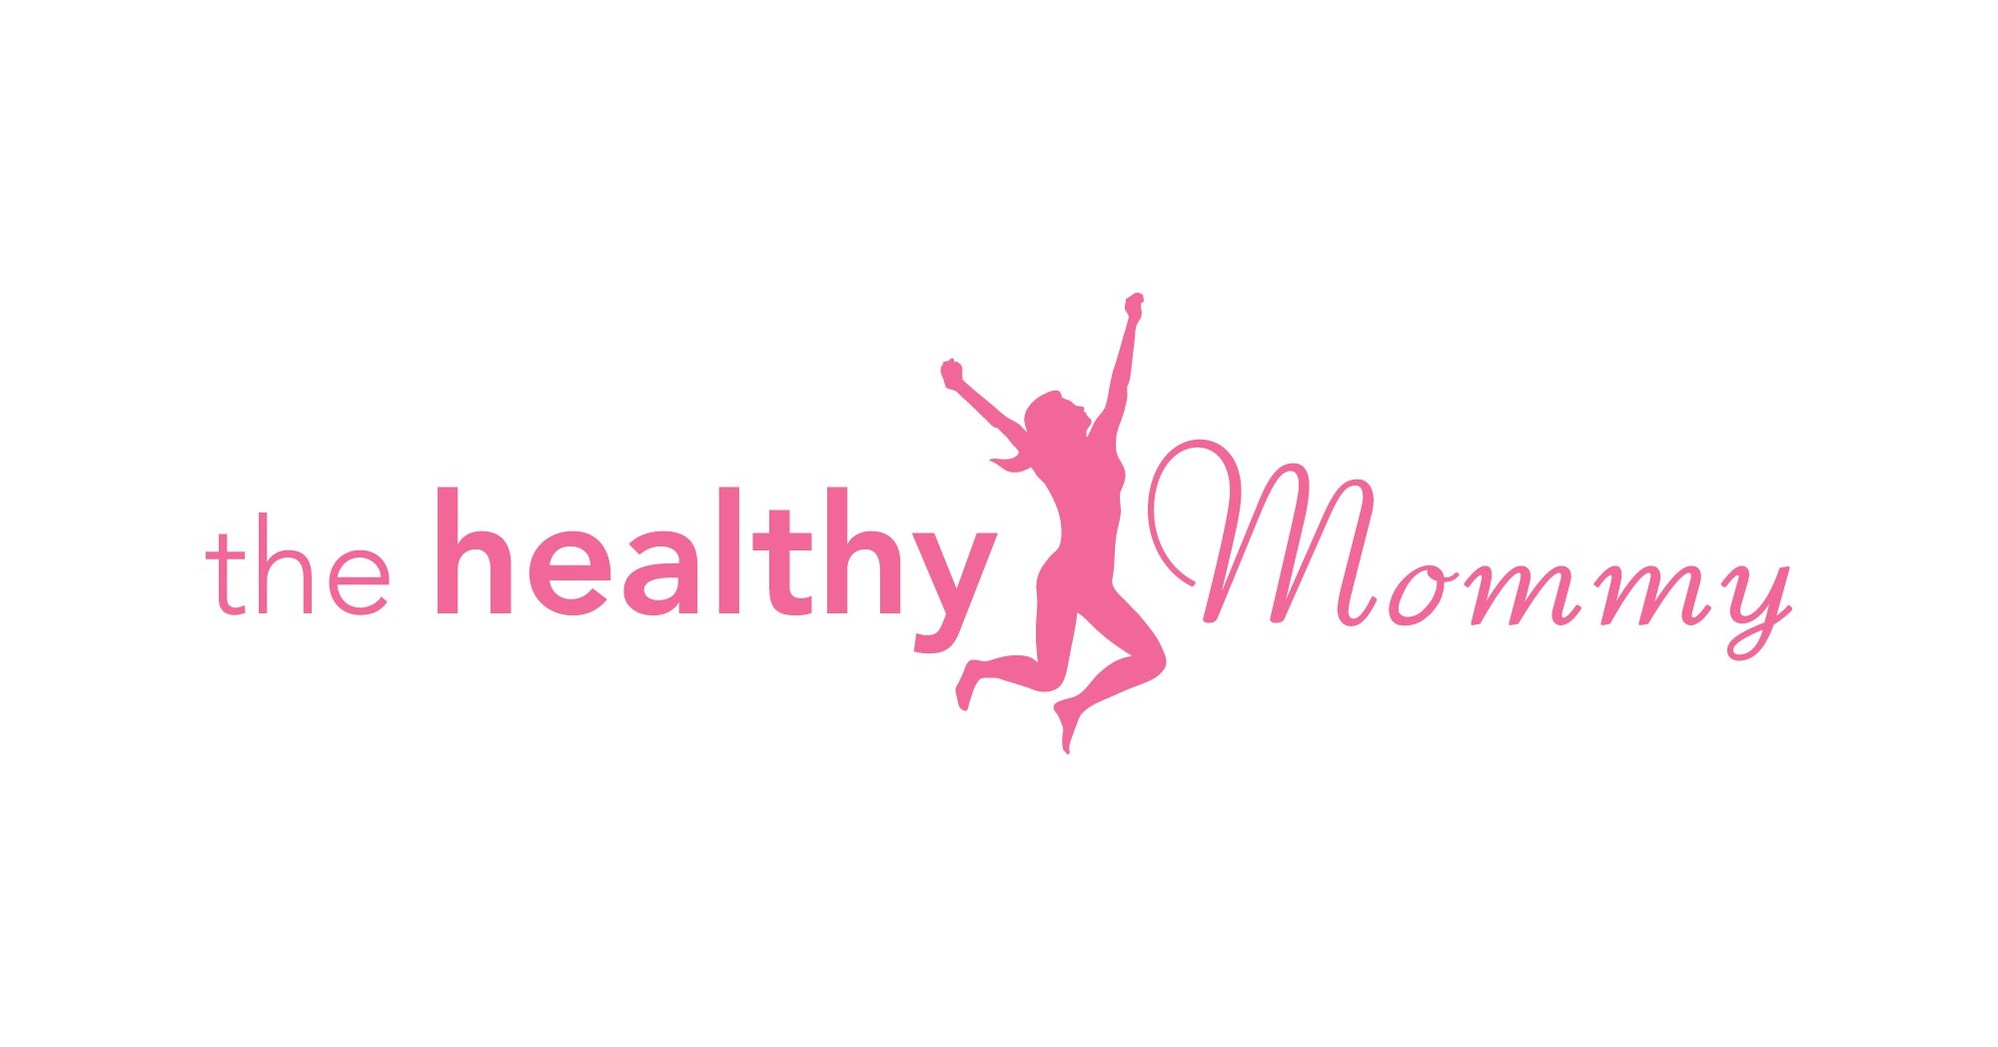 1 Health Program for Moms Celebrates US Launch with World's